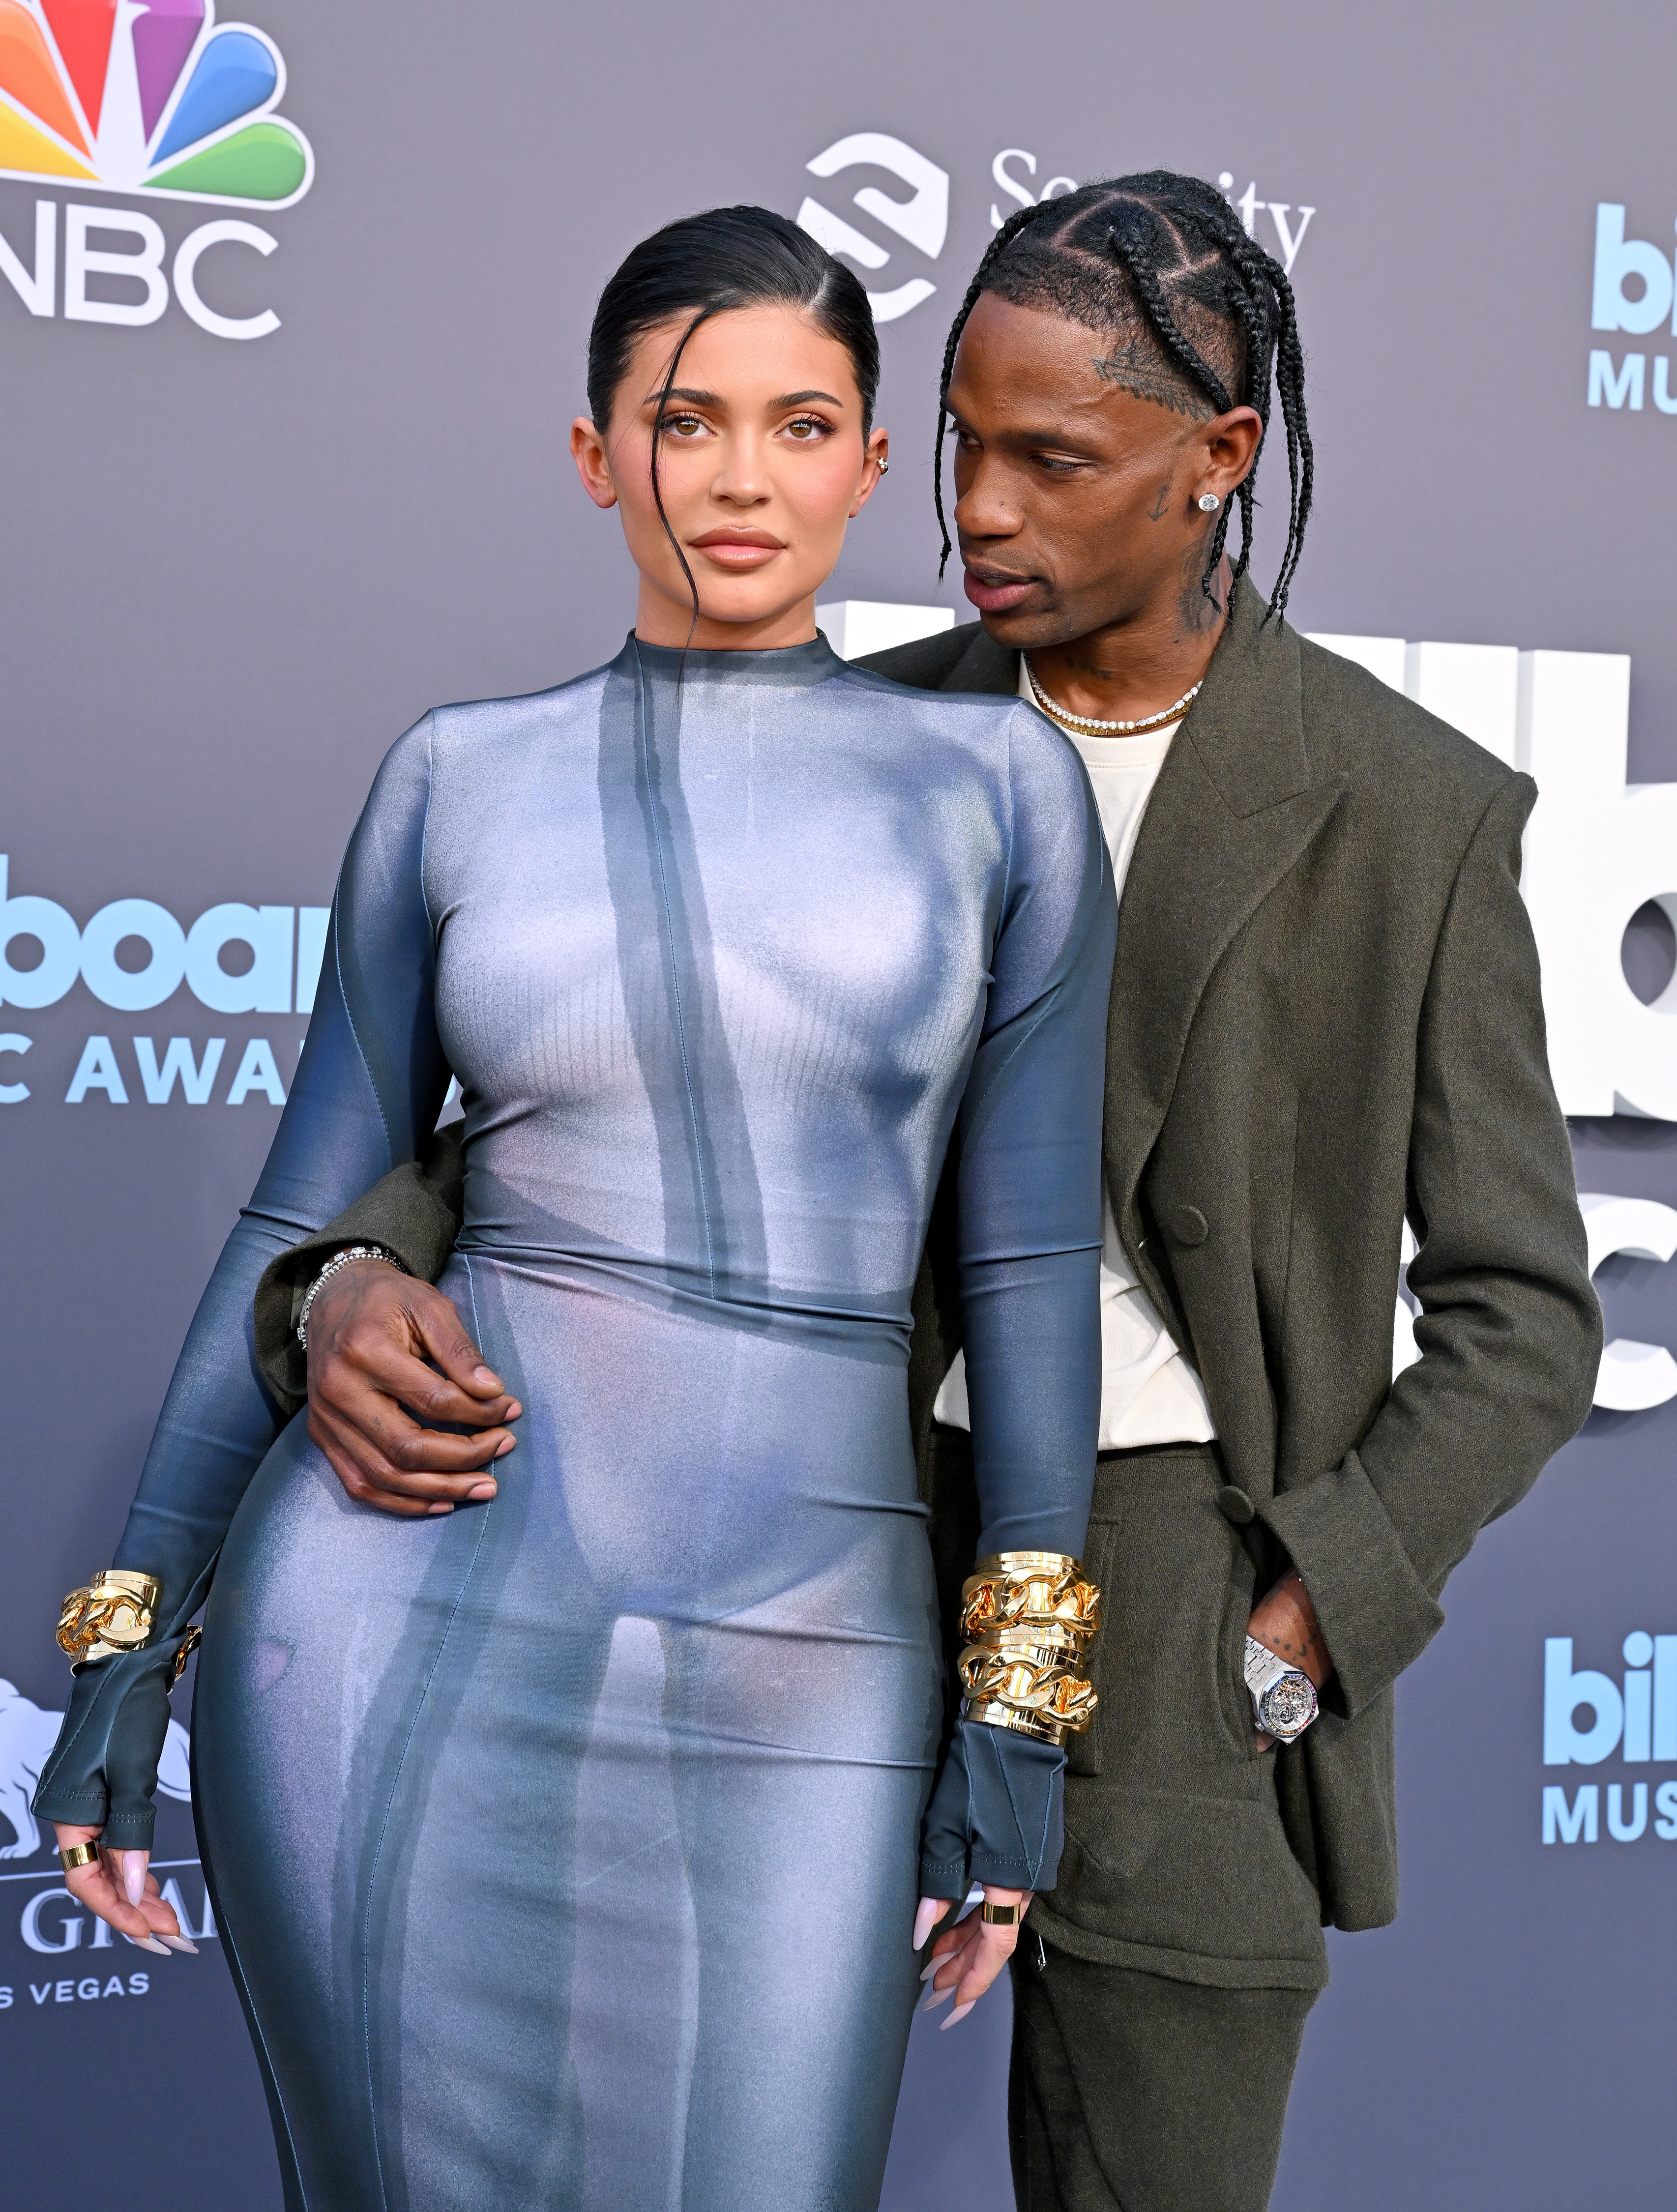 Kylie shares a daughter and son with her ex, Travis Scott, from whom she split in 2022